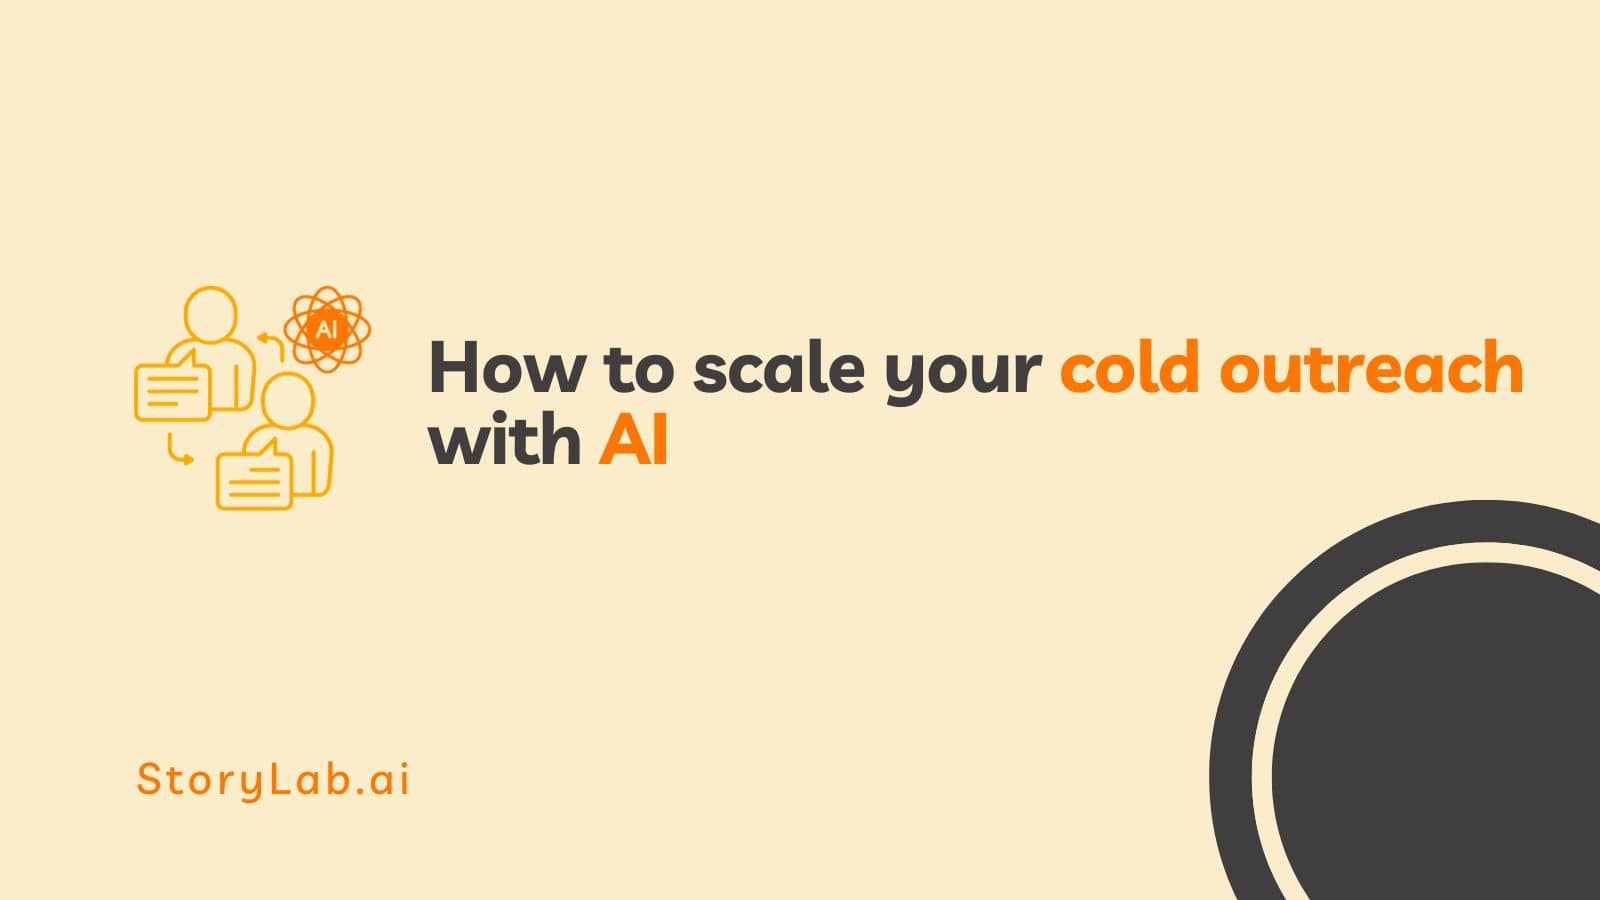 How to scale your cold outreach process with AI and increase your success rate